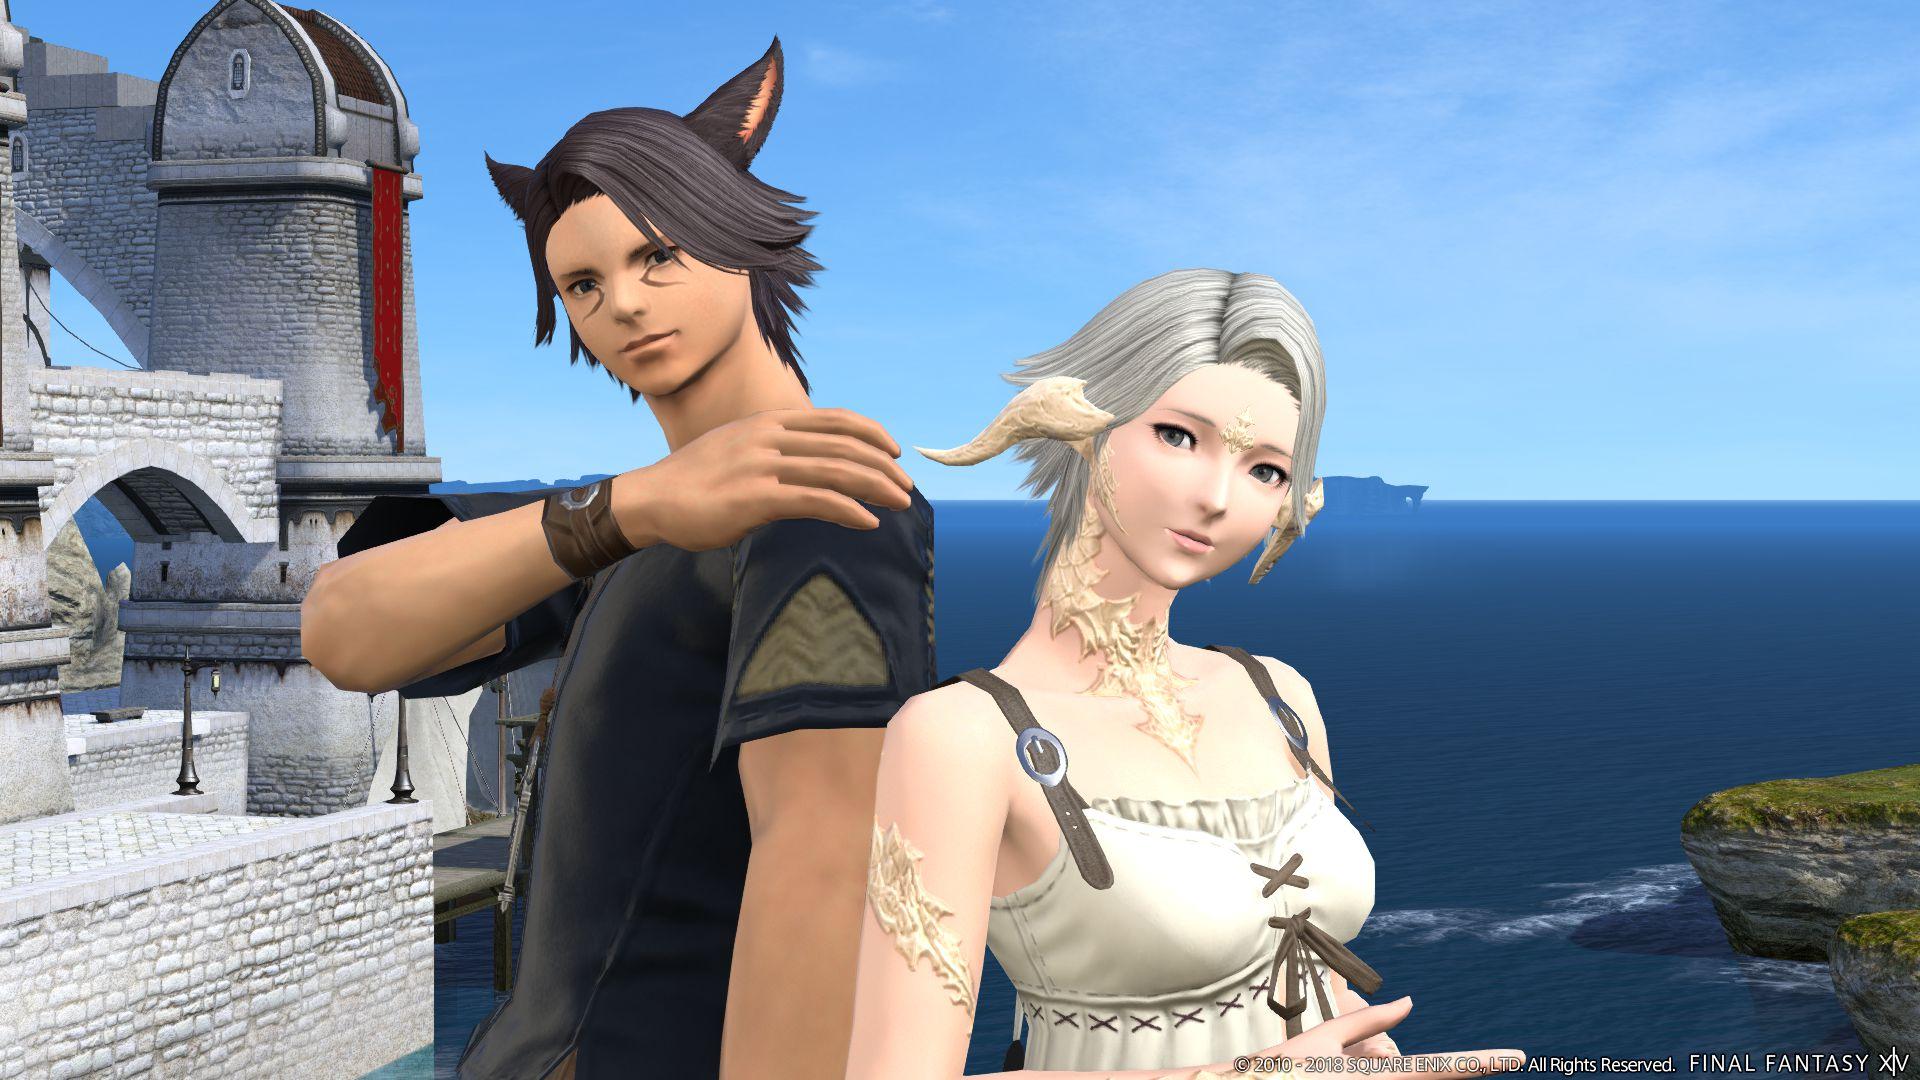 final fantasy xiv online boy with black hair and cat ears stands next to a girl in white with silver hair